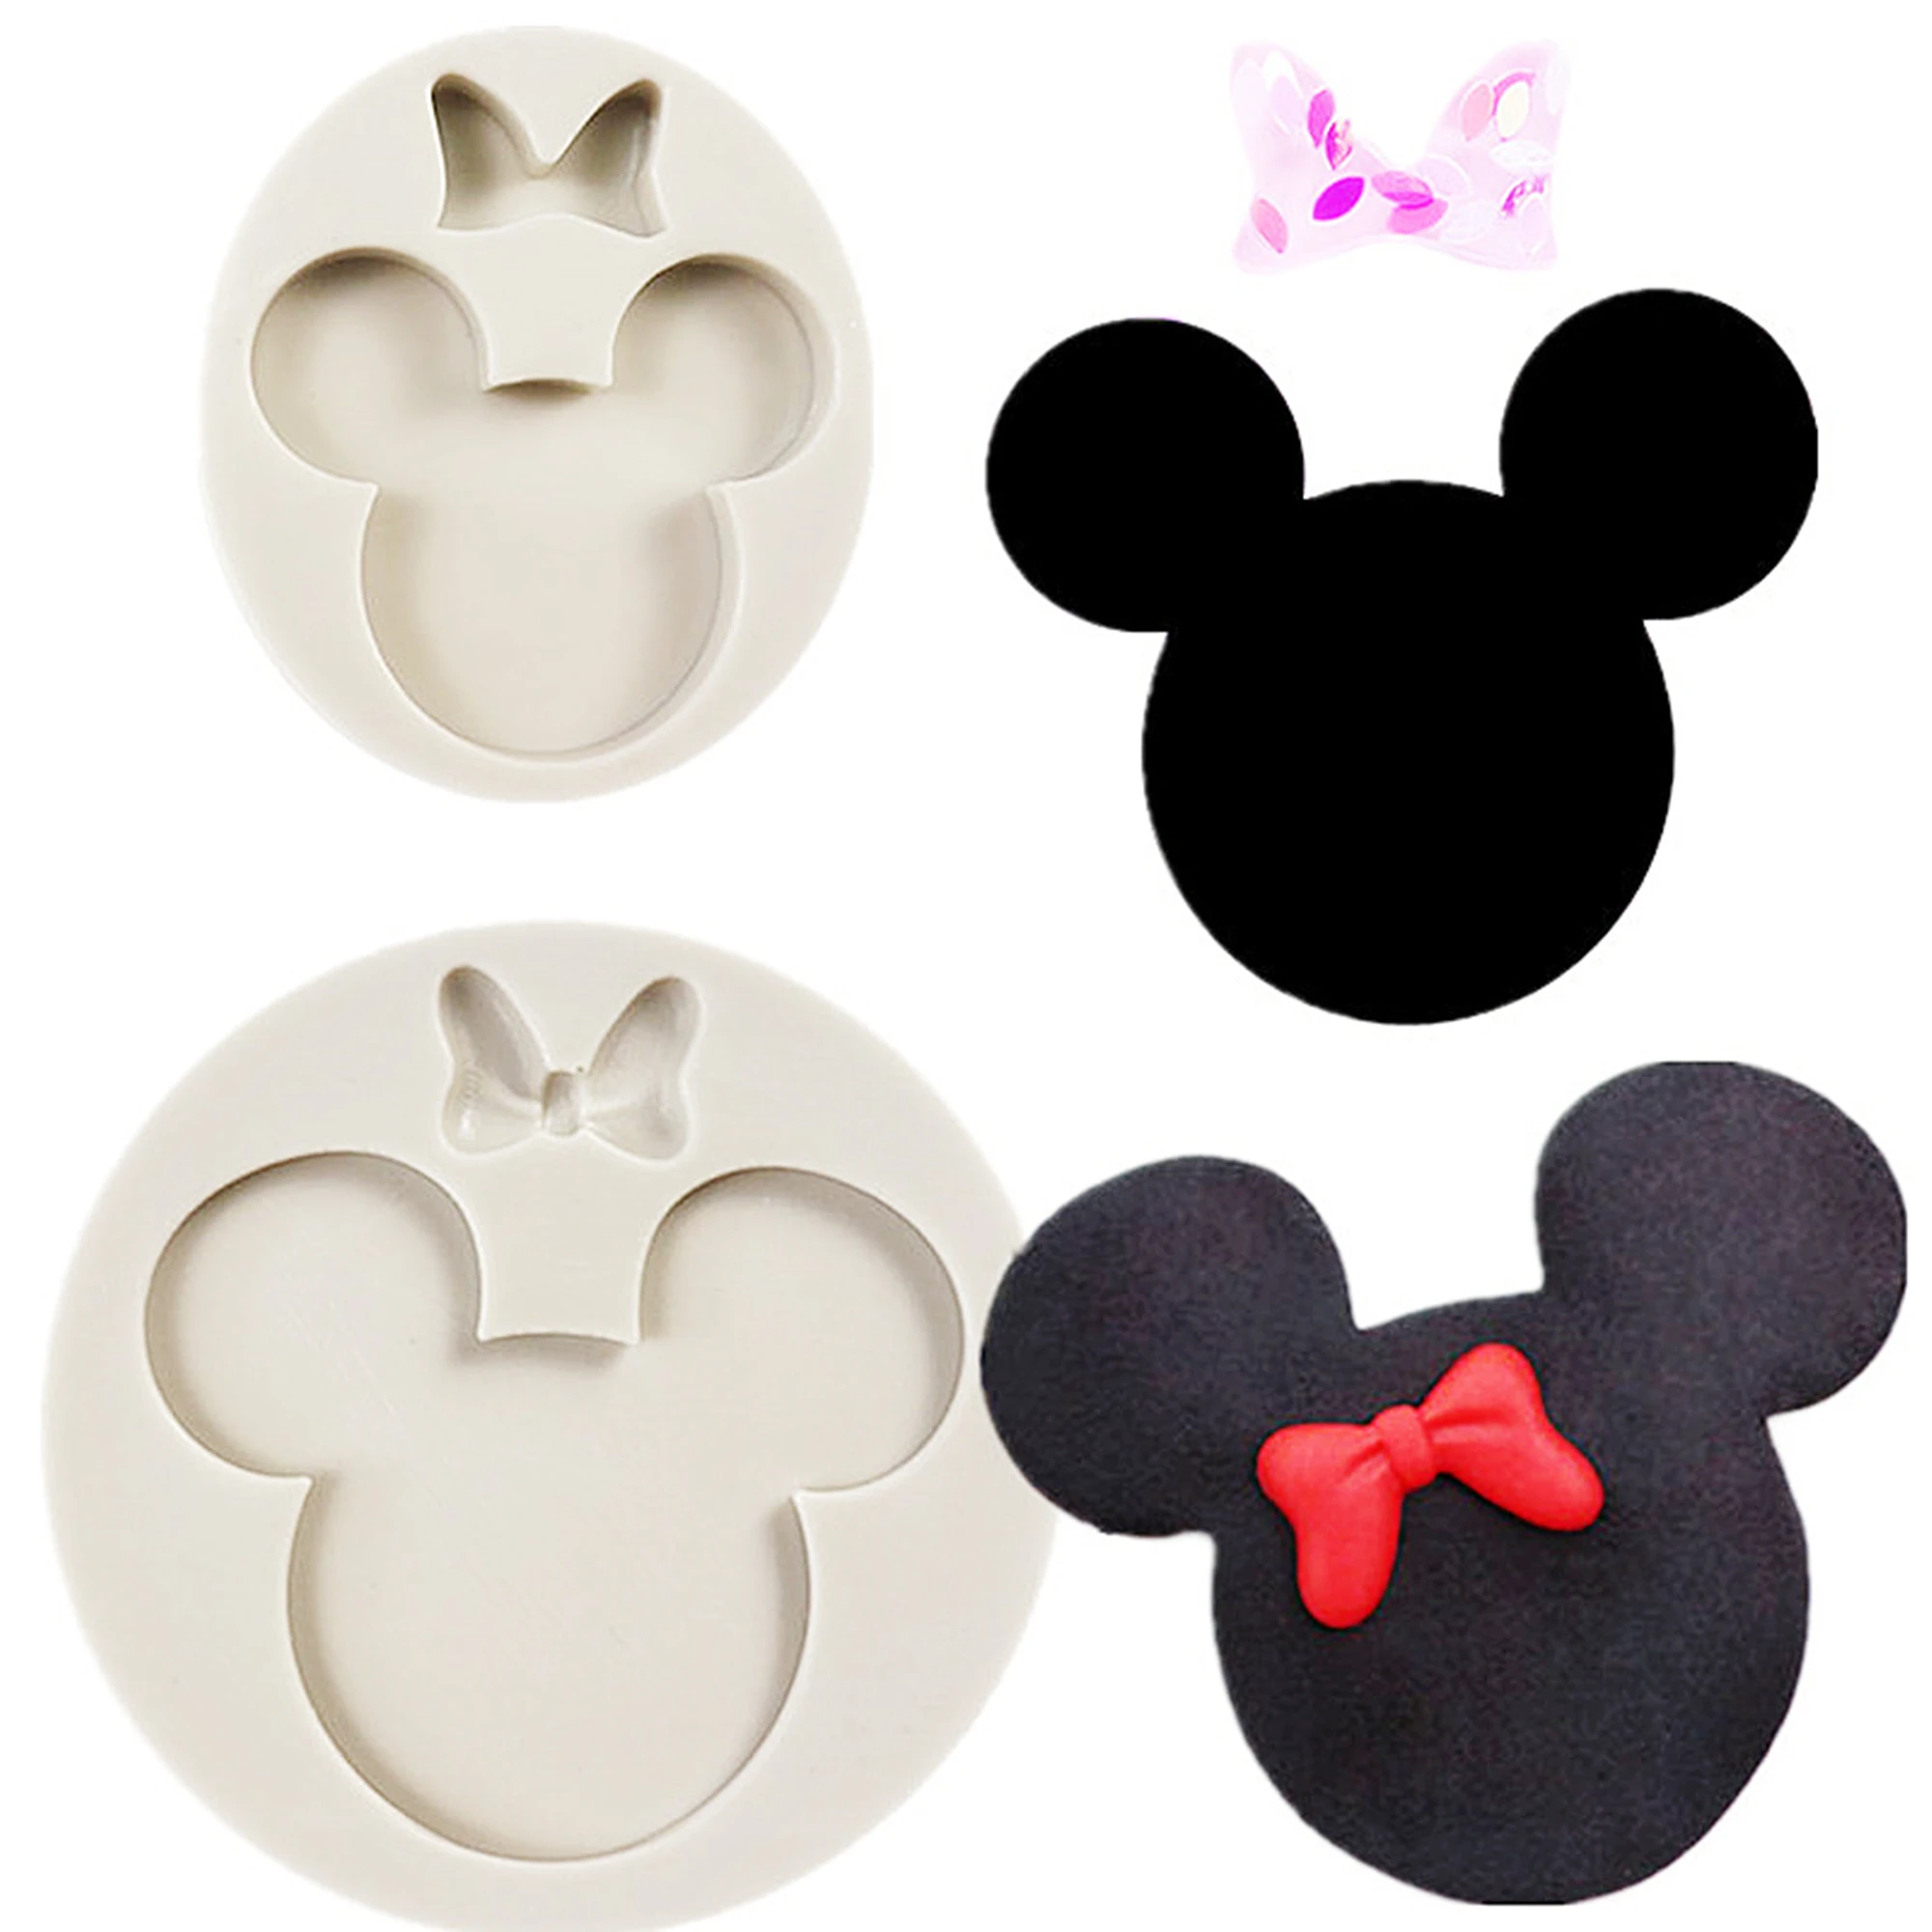 

Cute Mouse Fondant Silicone Mold Craft Chocolate Candy Resin Clay Mold Cake Decorating Tools kitchen Baking Tools M2047